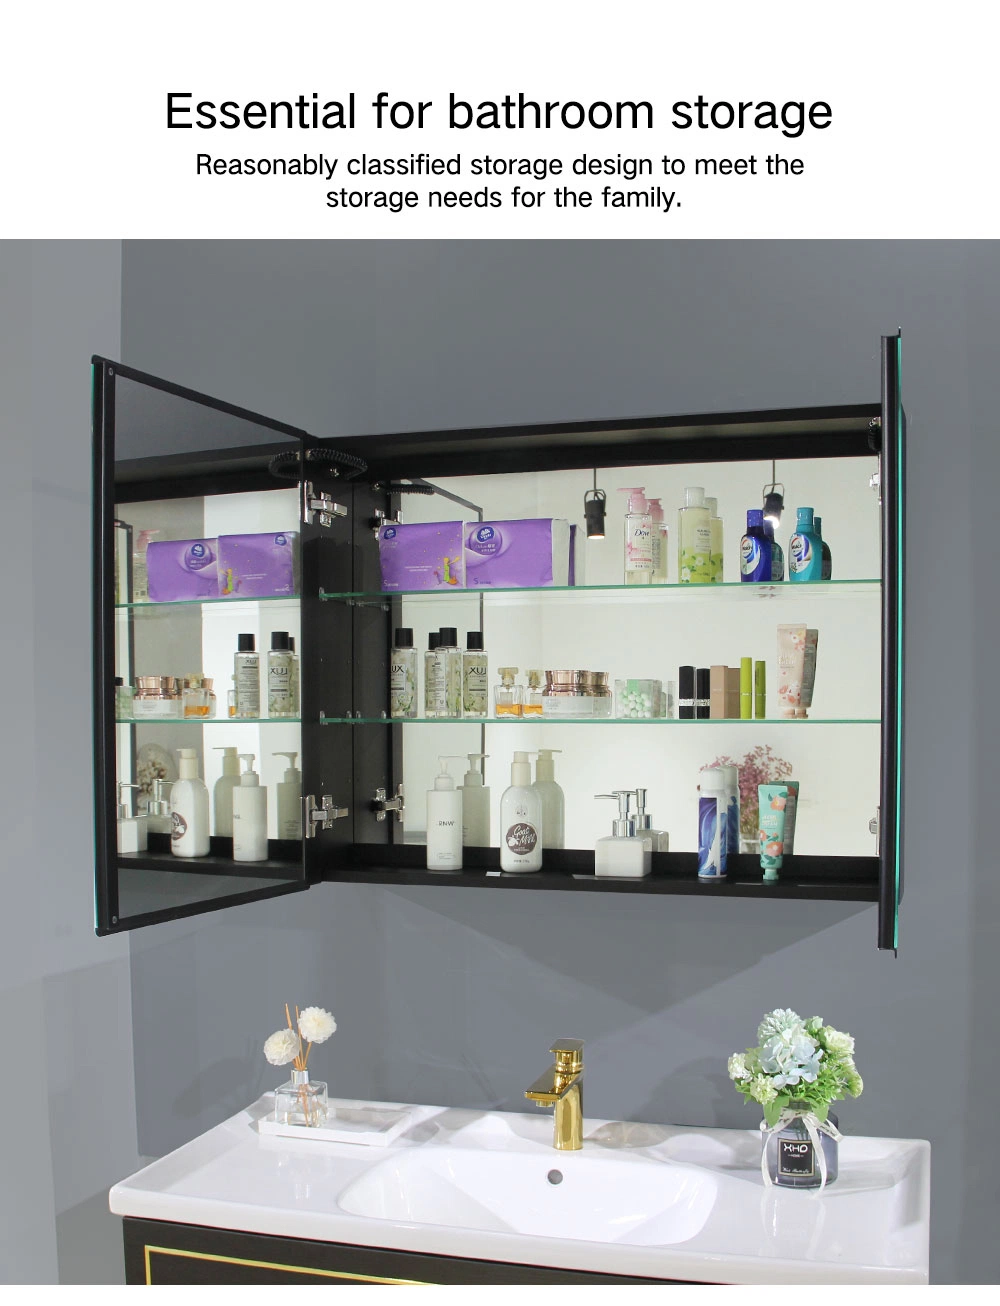 Modern Design Glass Rectangle Touch Screen Bathroom Cabinet Mirror LED Lights with Anti-Fogging Mirror